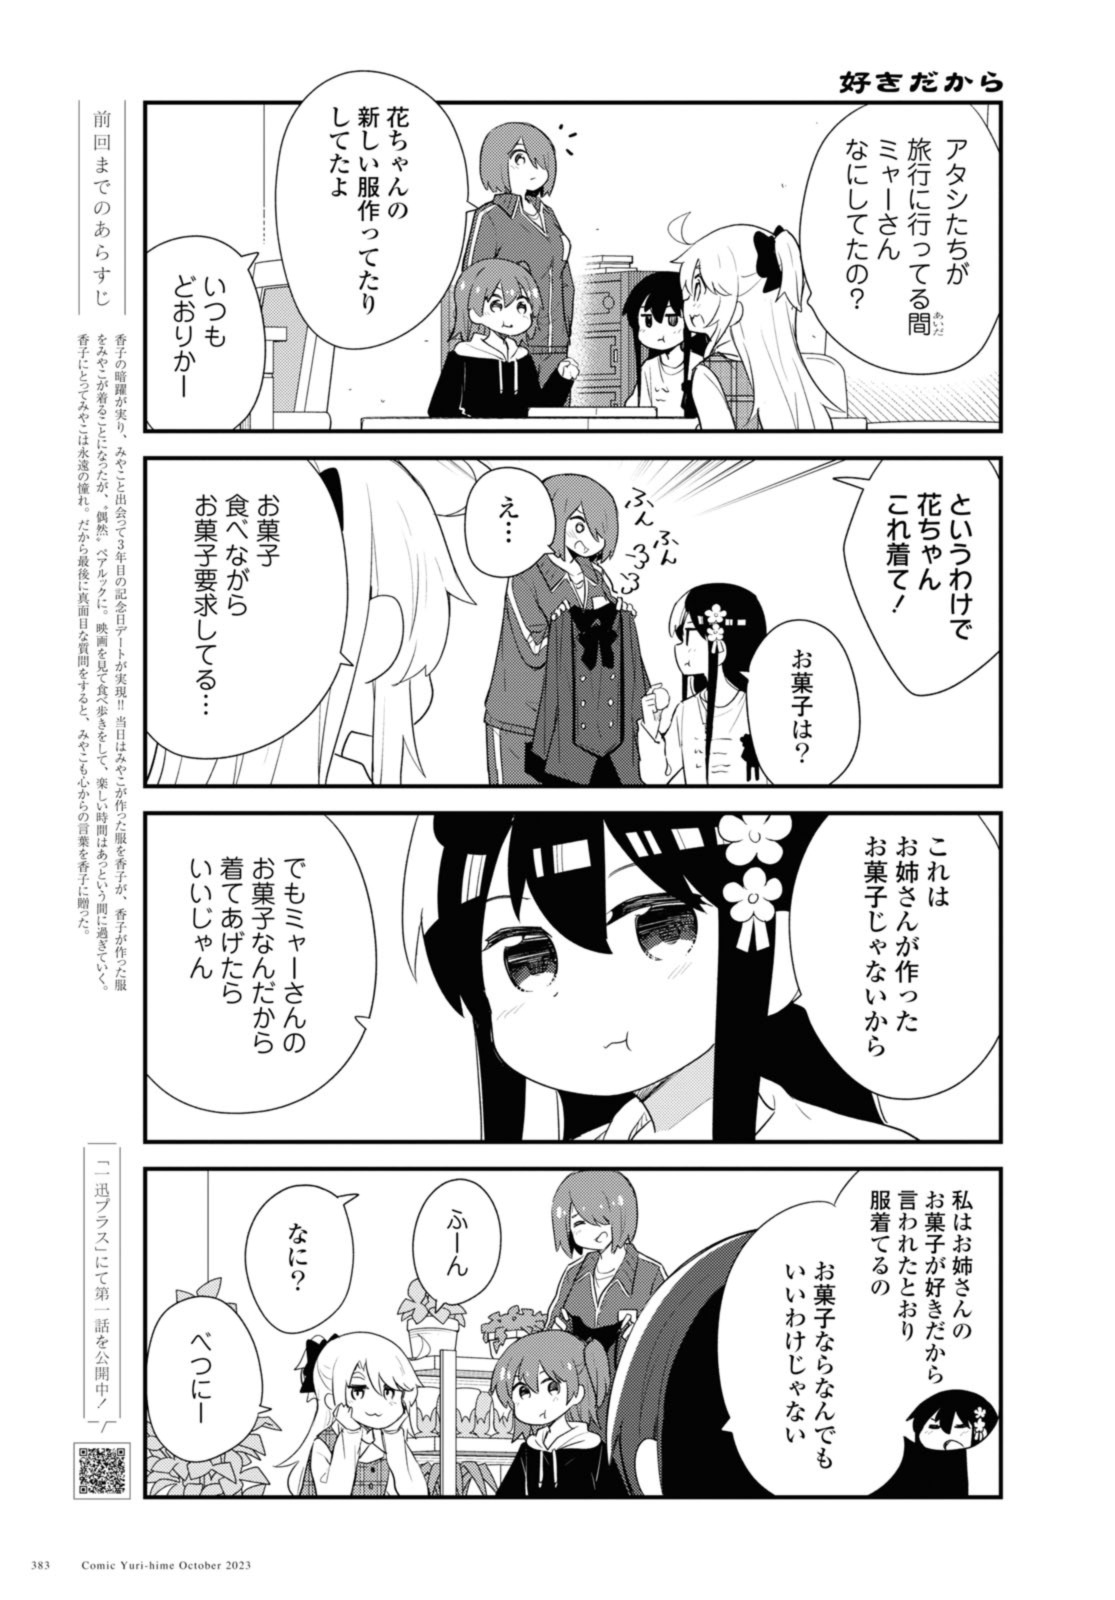 Wataten! An Angel Flew Down to Me 私に天使が舞い降りた！ 第109話 - Page 3